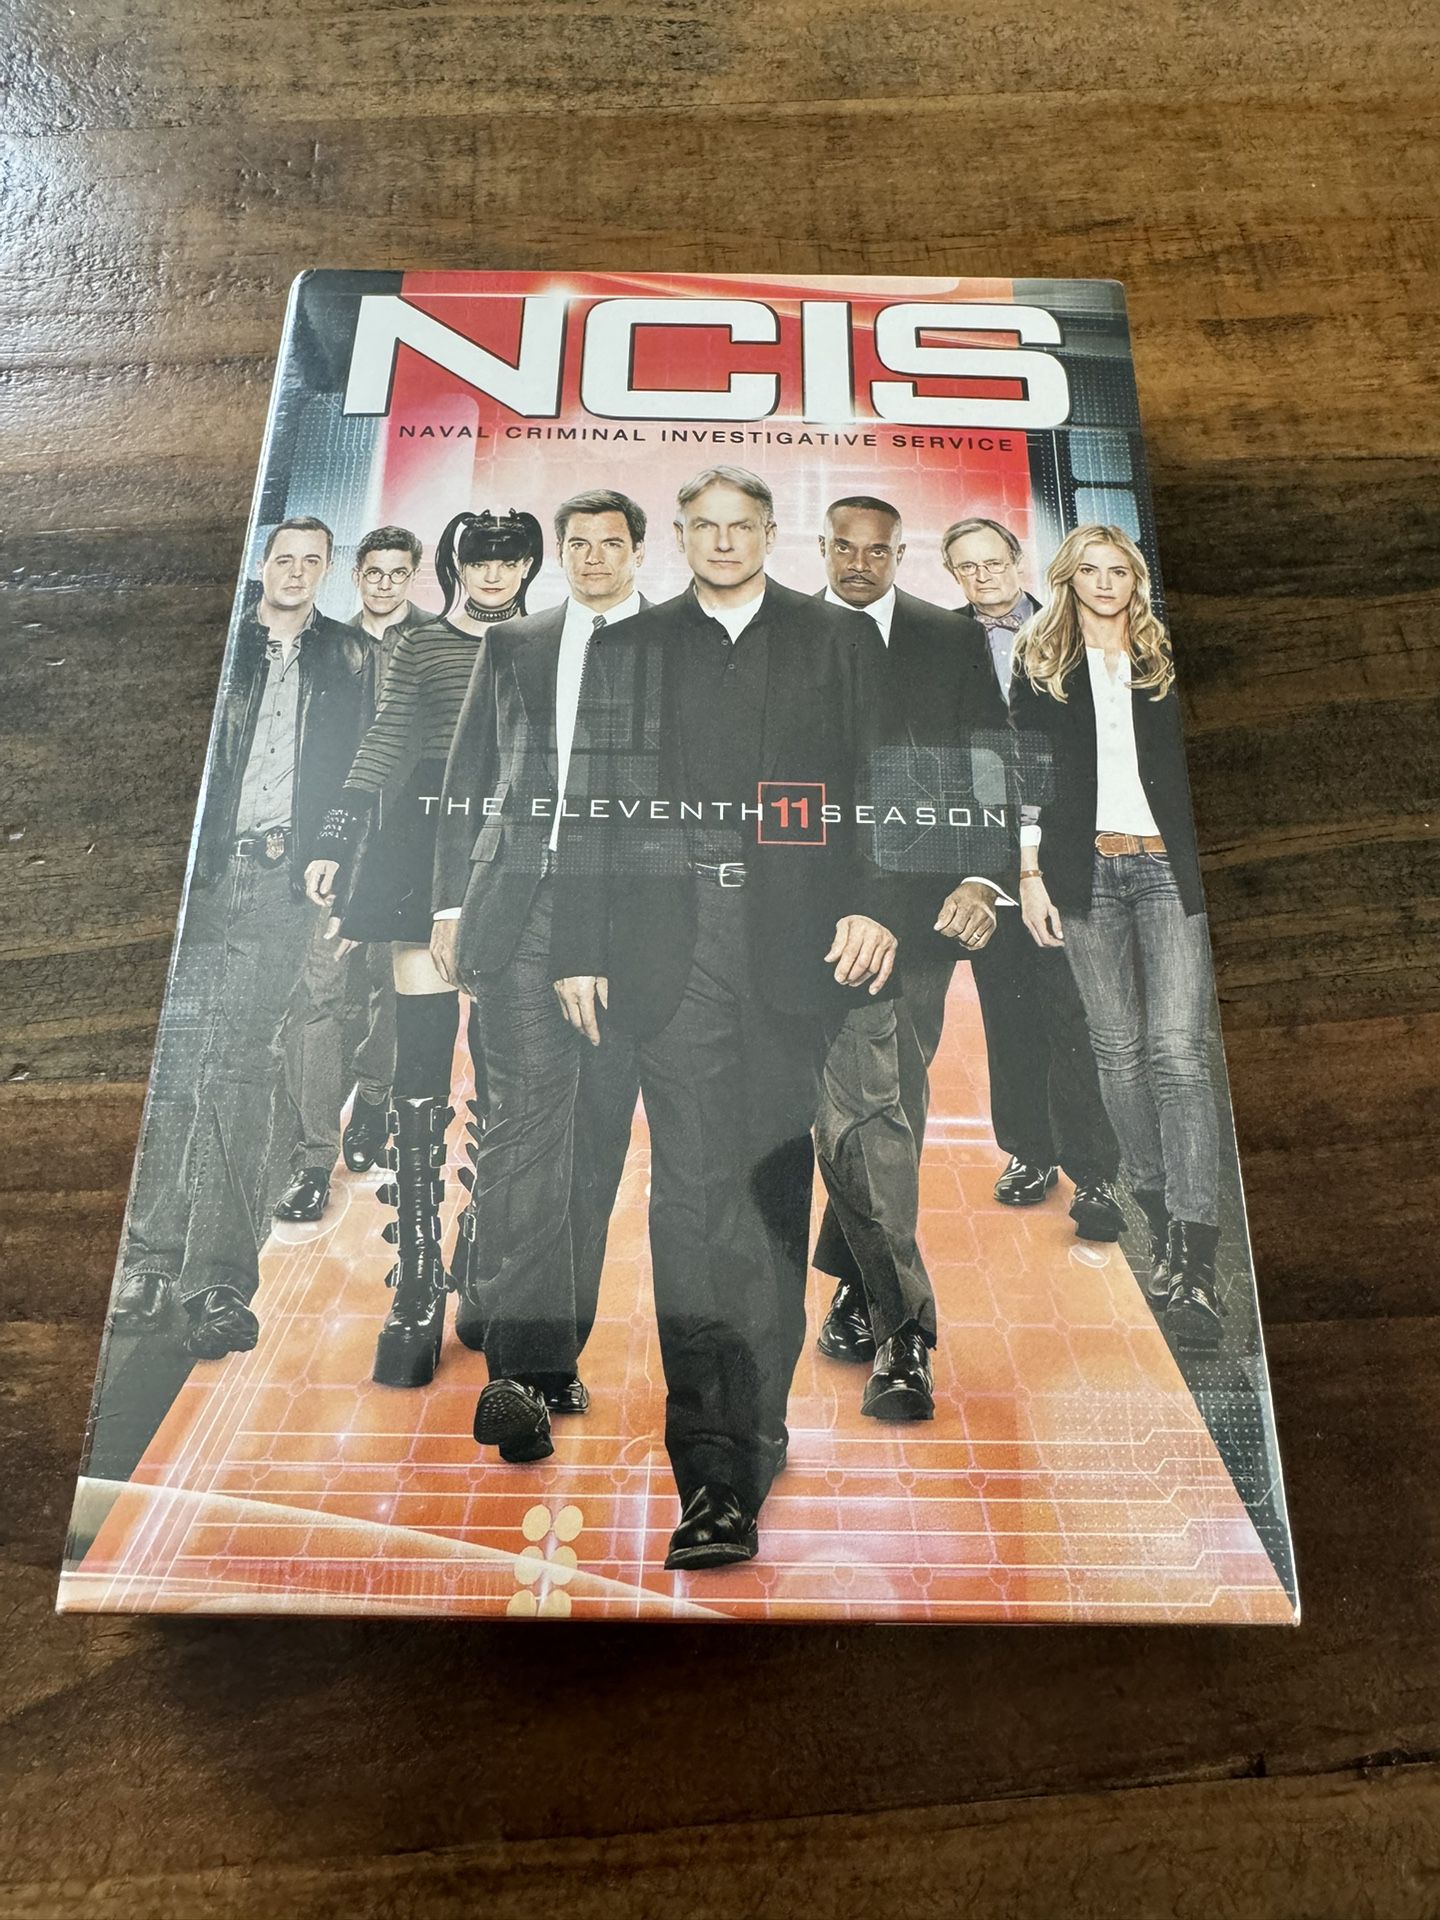 New DVD NCIS Naval Criminal Investigative Service Season 11  2014 Sealed Paramount Pictures.